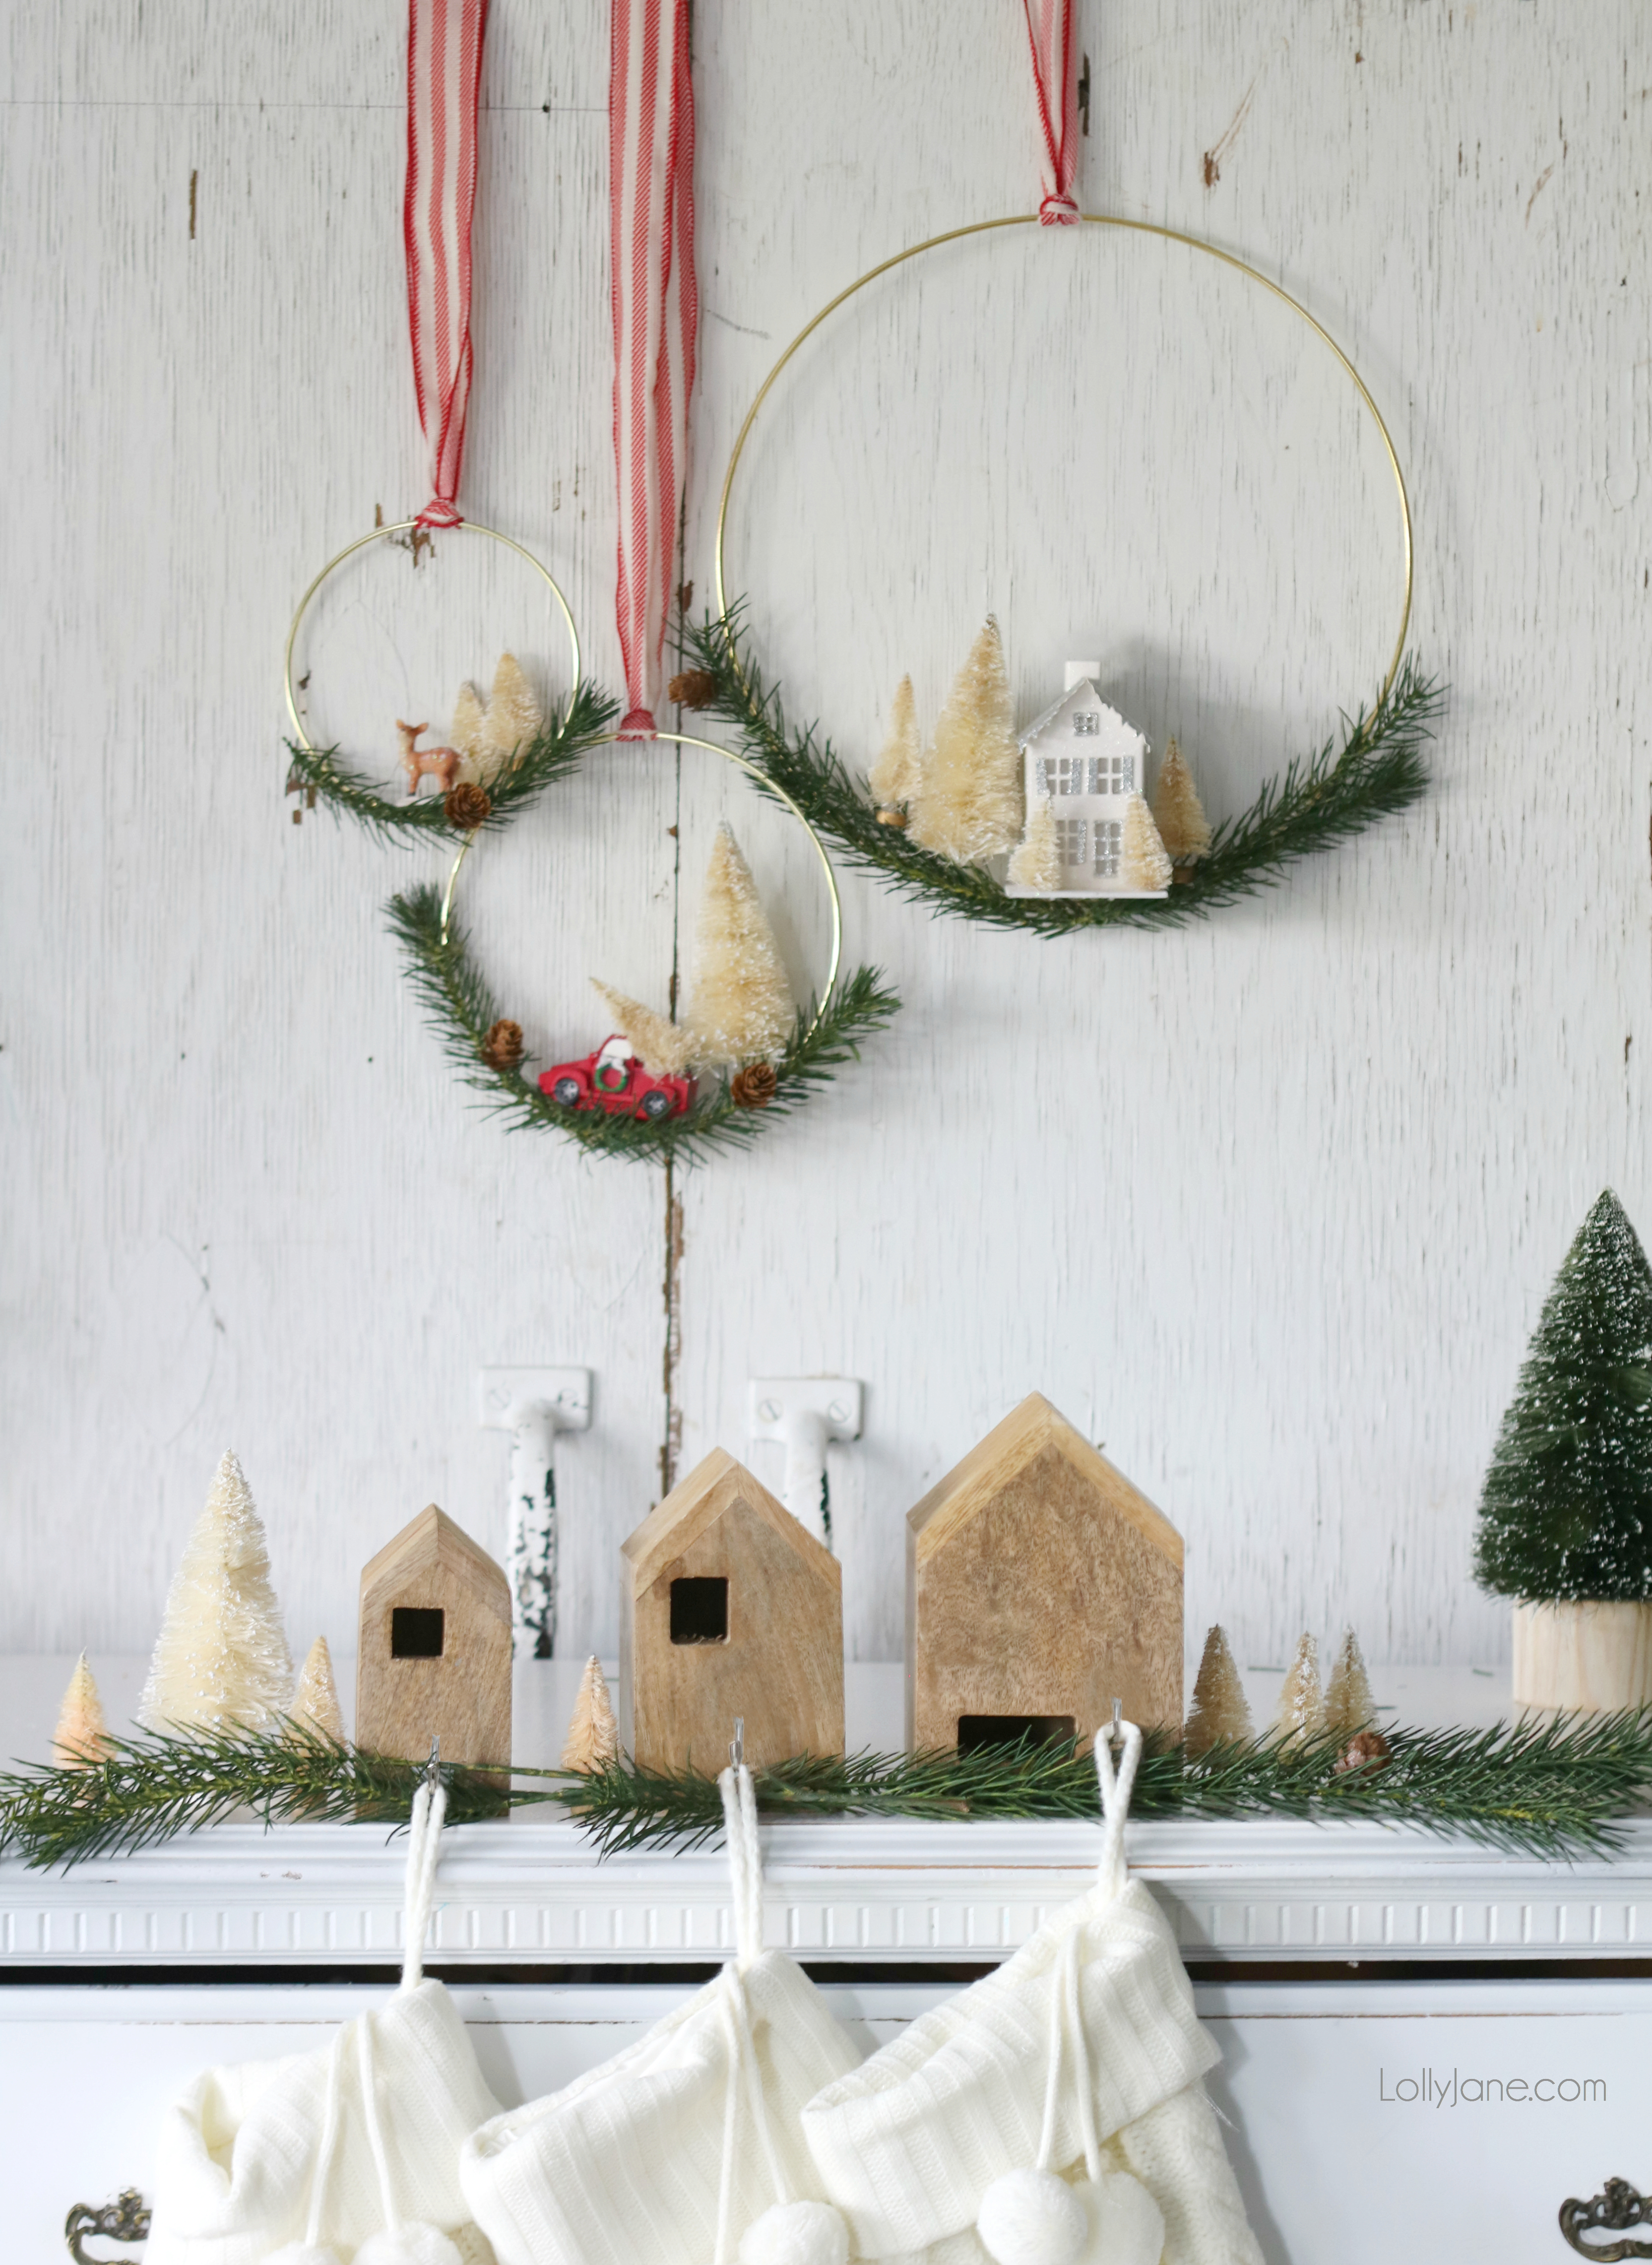 Spruce up your holiday decor with these easy DIY Bottle Brush Tree Wreaths! Cute!